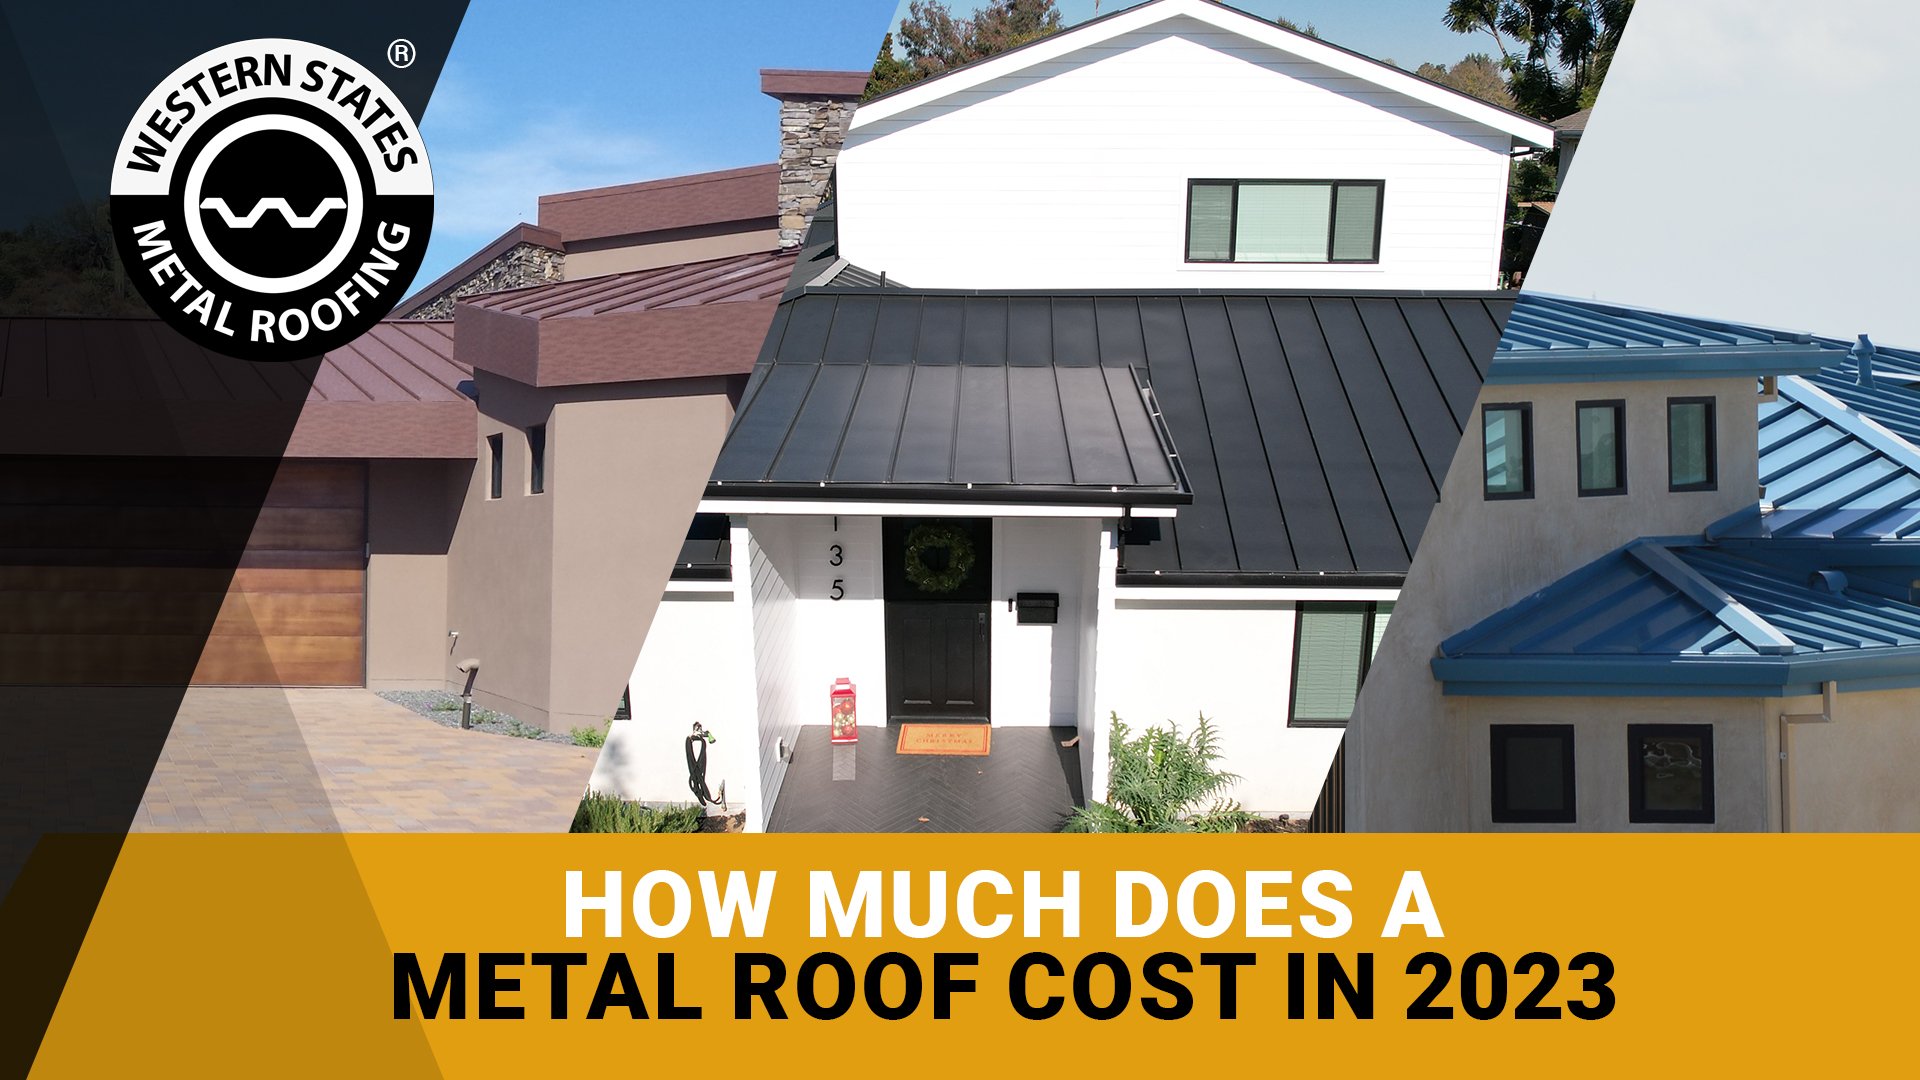 How Much Does Metal Roofing Cost In 2023?